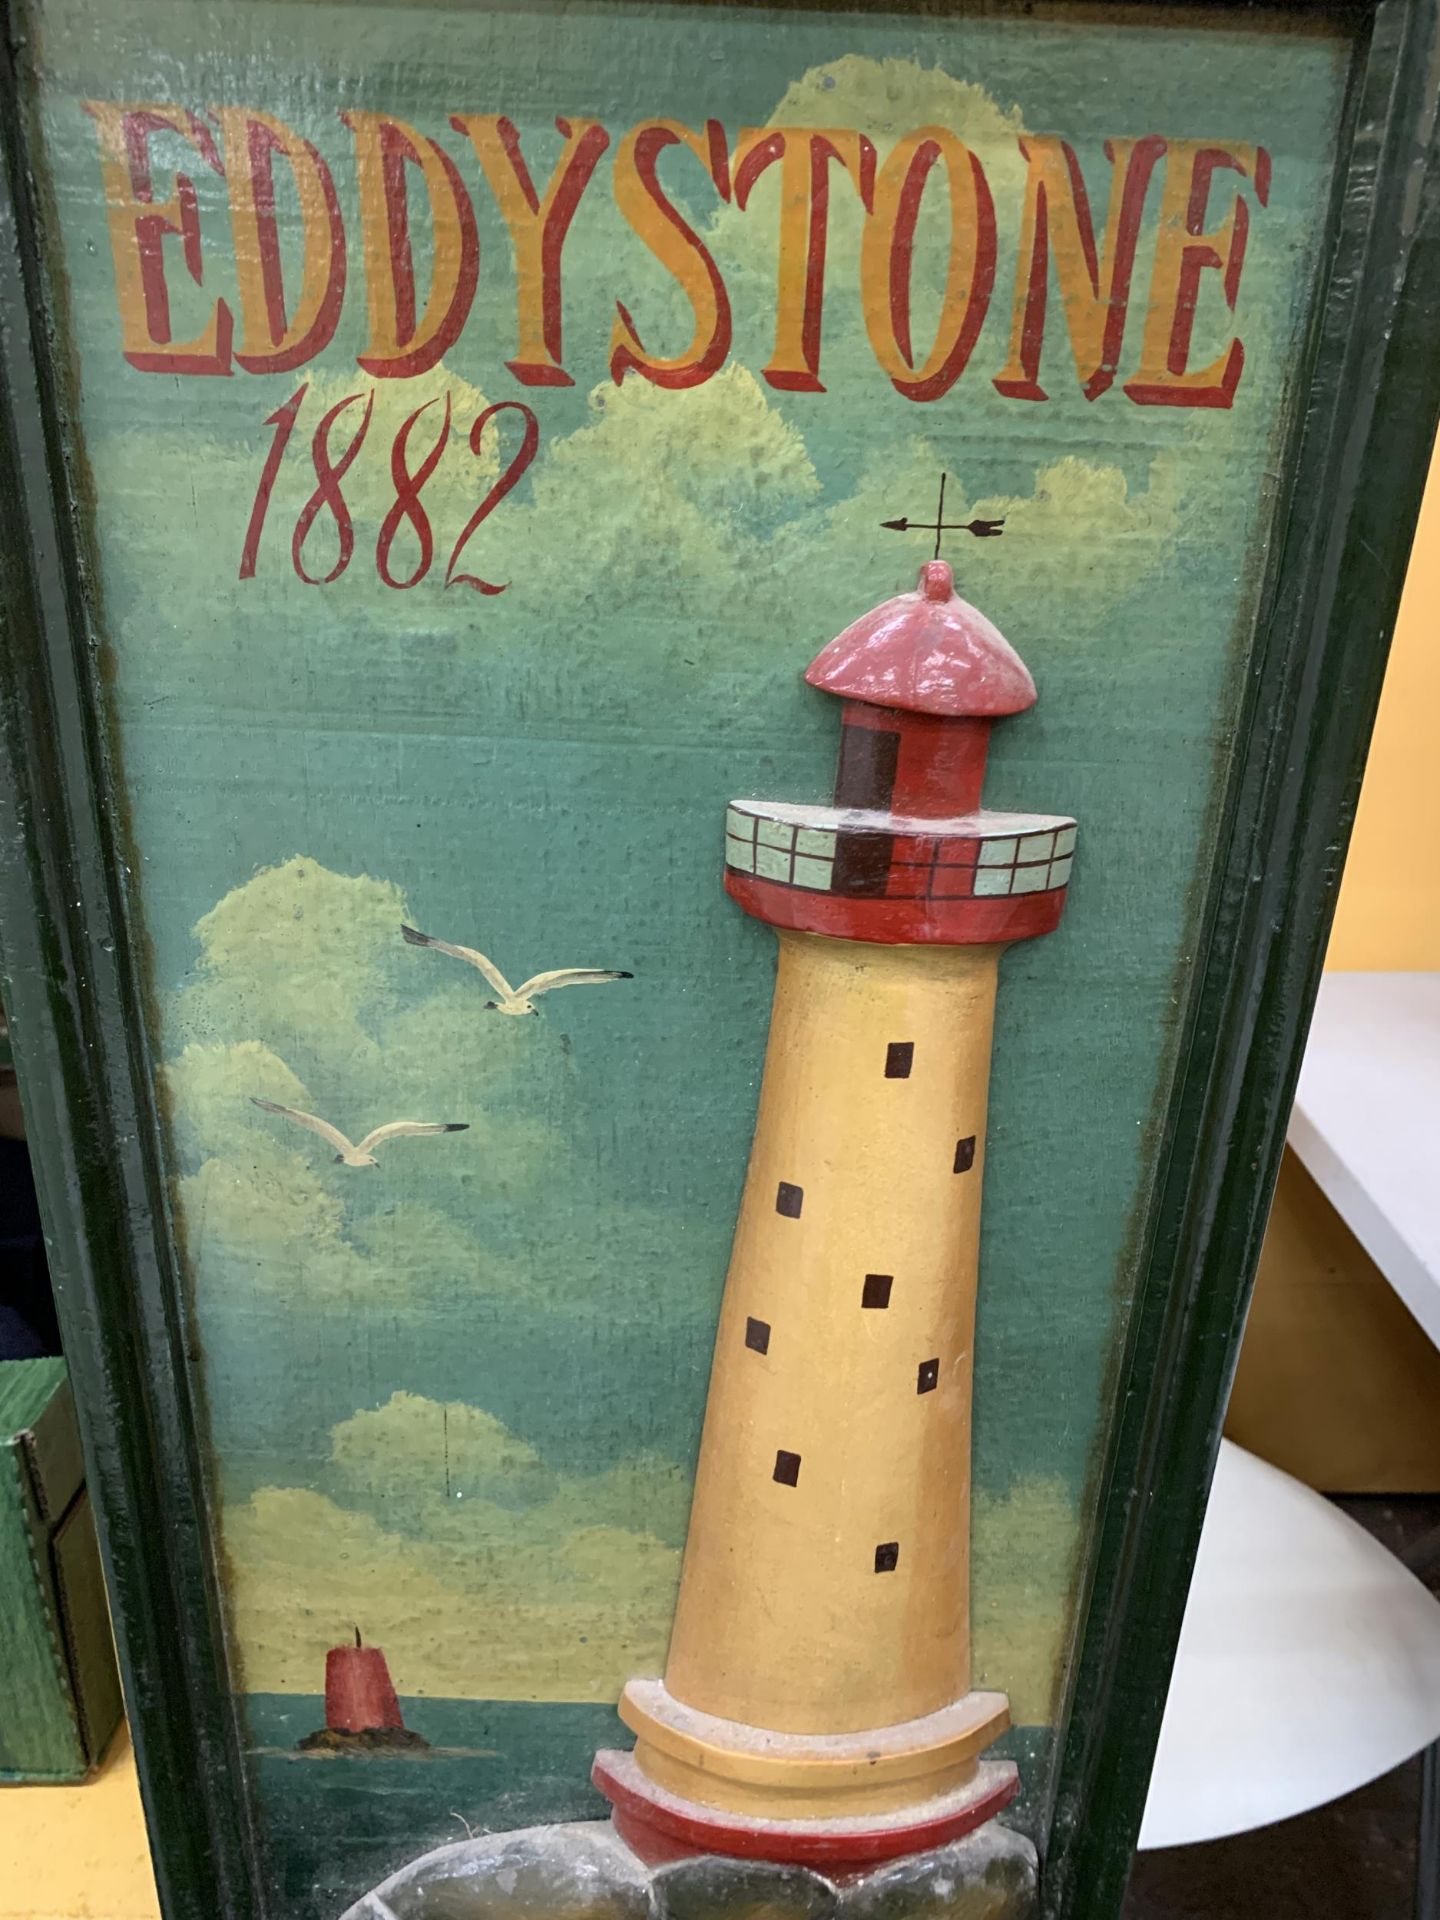 A LARGE 3-D EDDYSTONE LIGHTHOUSE WOODEN WALL PLAQUE - Image 2 of 2